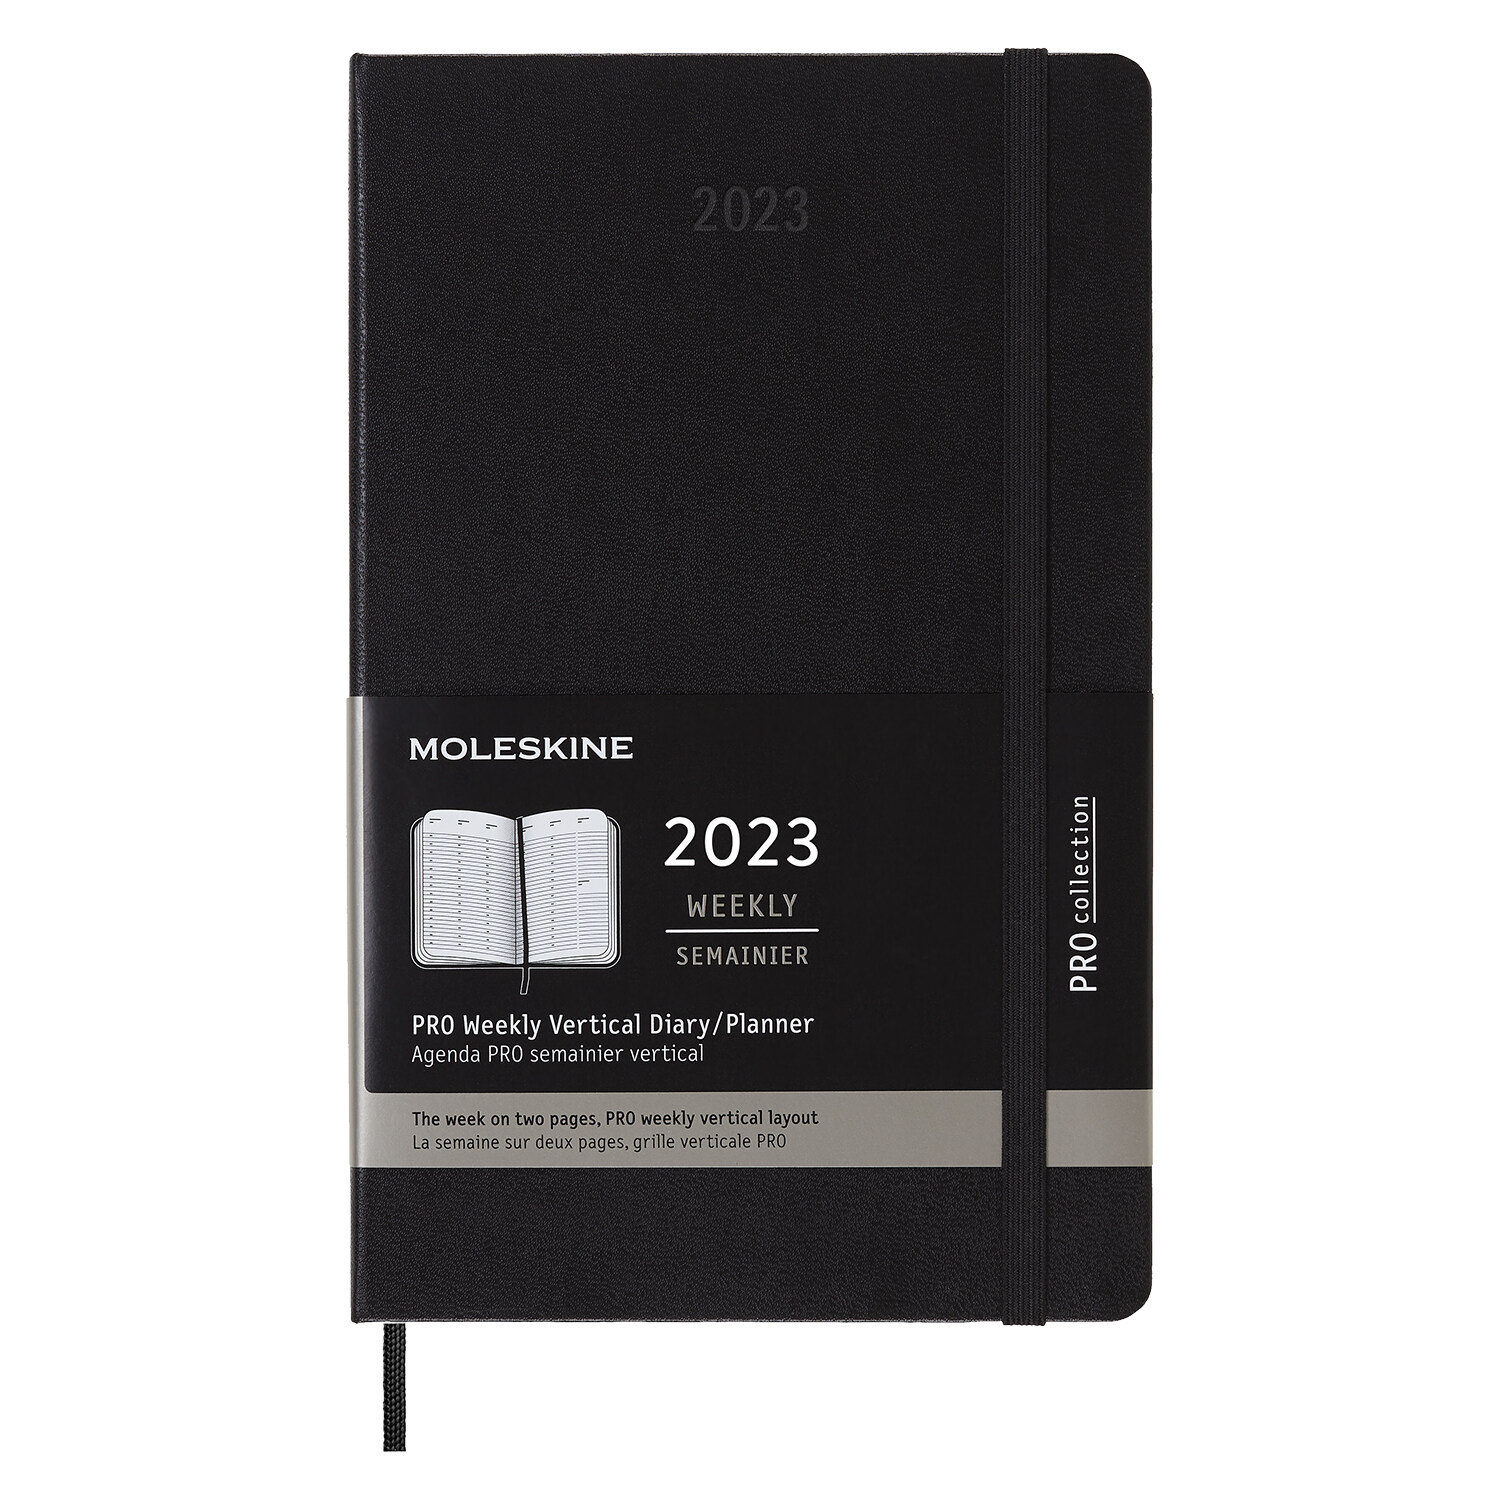 Moleskine 2023 Professional Vertical Weekly Planner, 12m, Large, Black, Hard Cover (5 X 8.25) (Other)